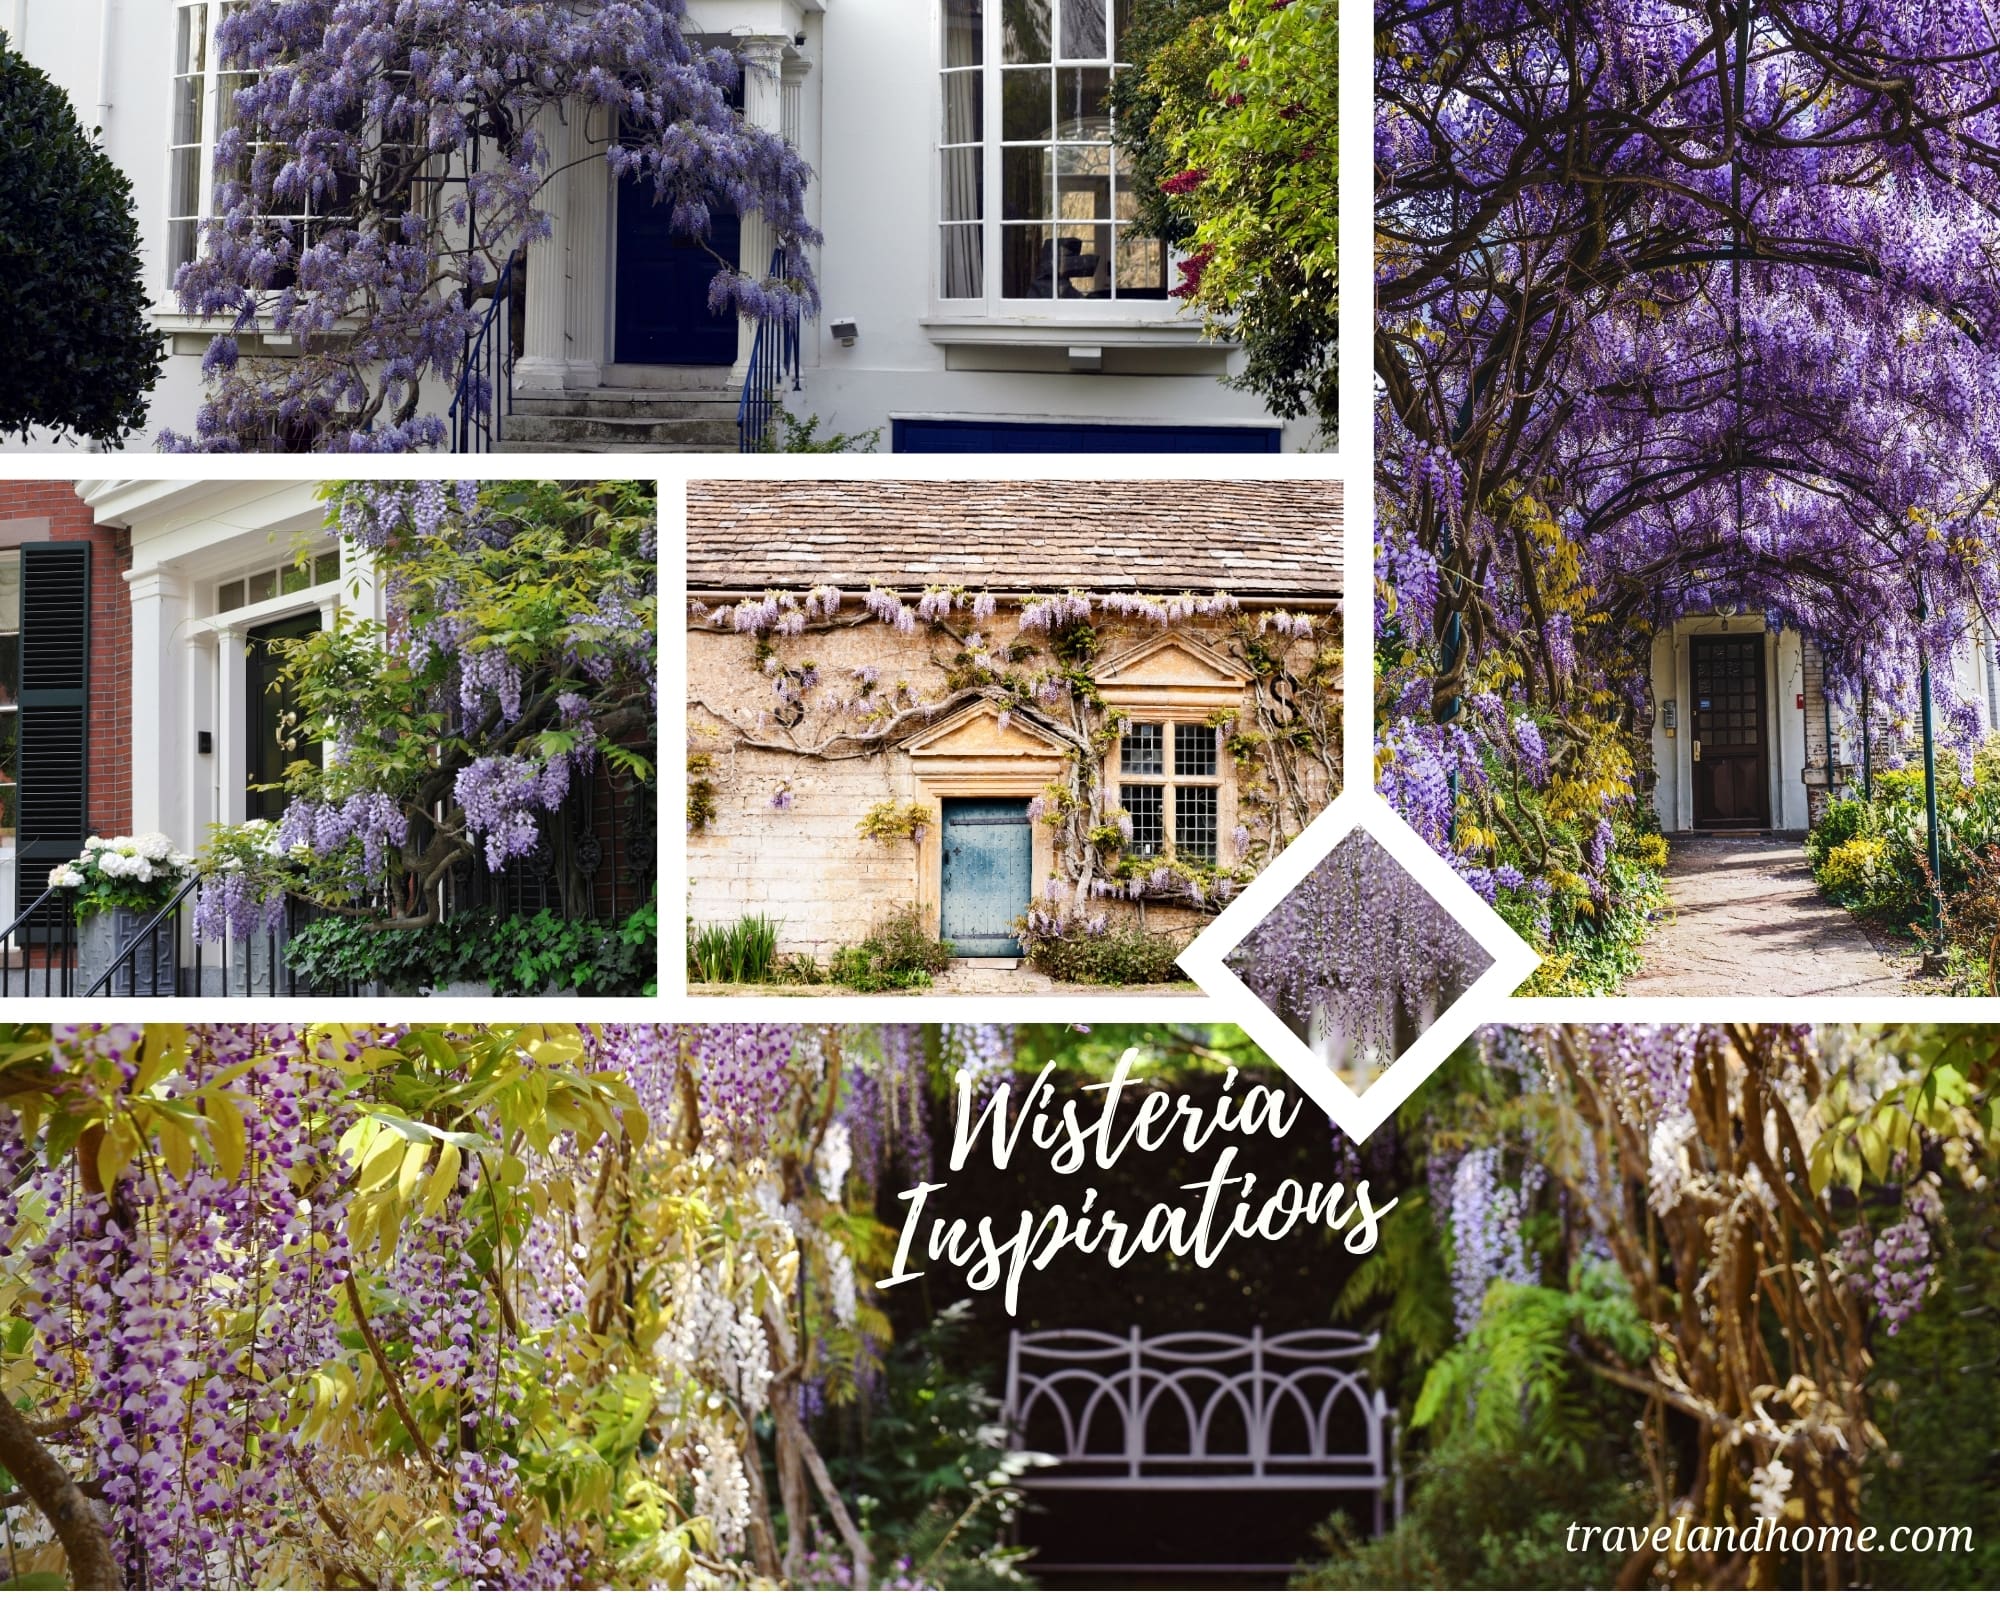 Travel inspirations, wisteria, garden, house, front door, bench, travel and home, #travelandhome min